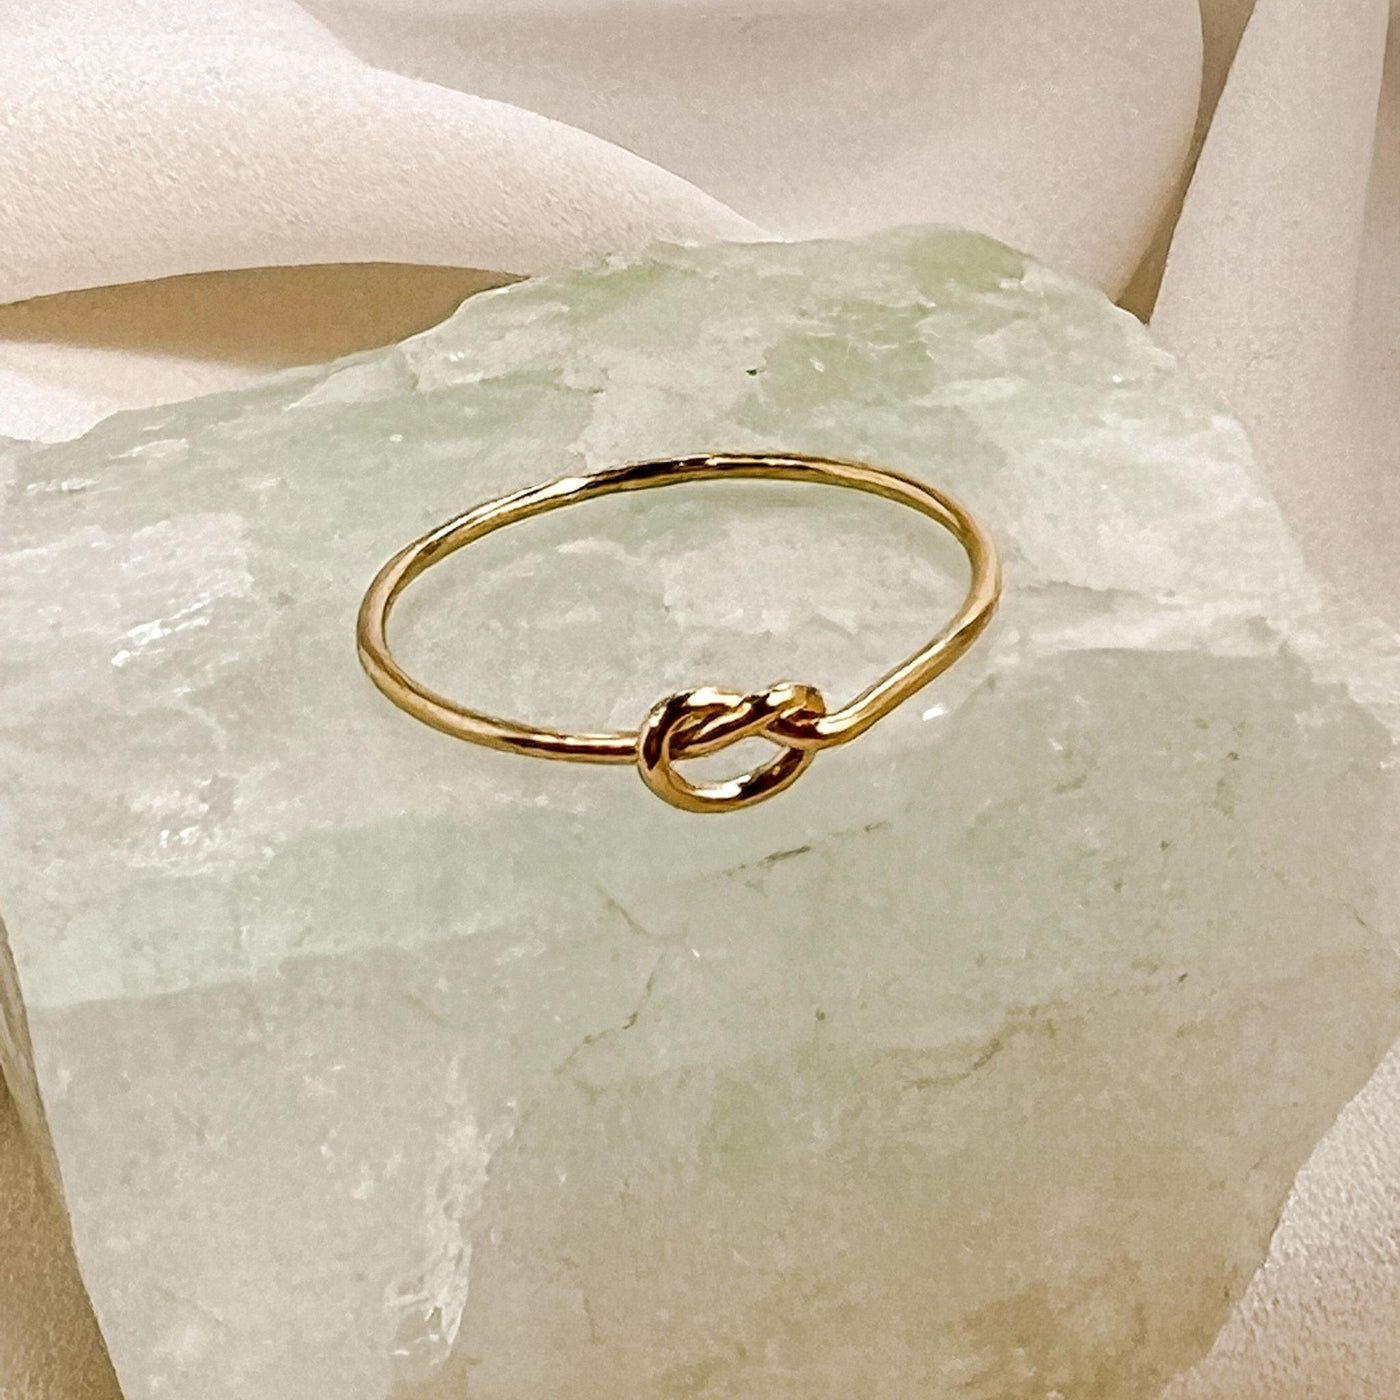 14K gold filled band ring with knot shaped accent. Ring is displayed on an aqua colour gemstone